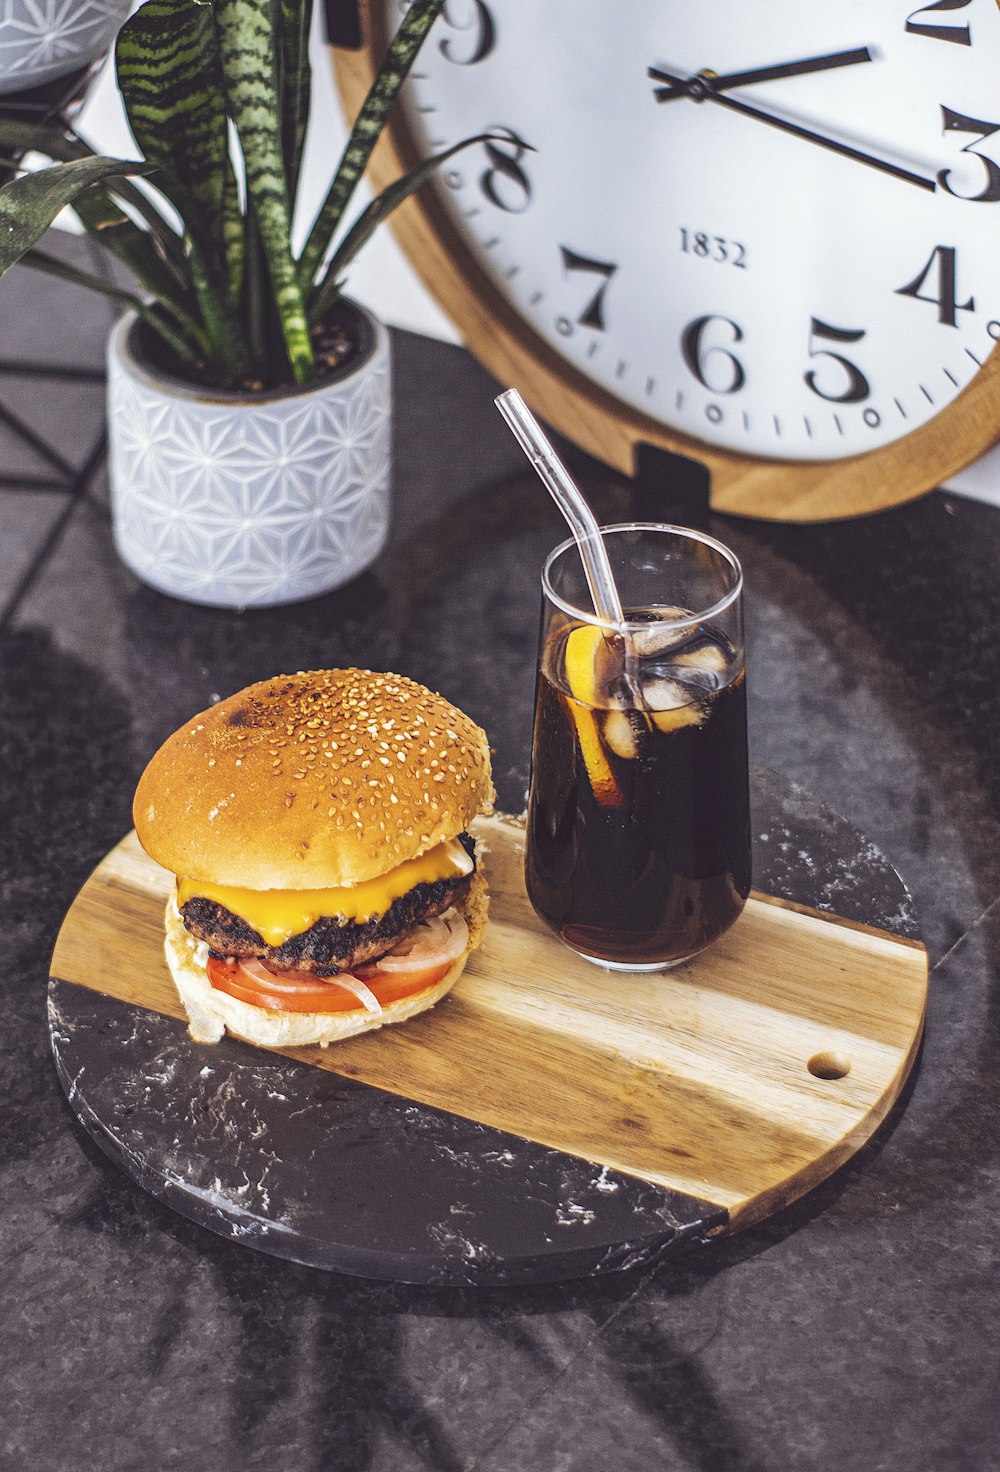 a burger and a glass of beer on a wooden cutting board